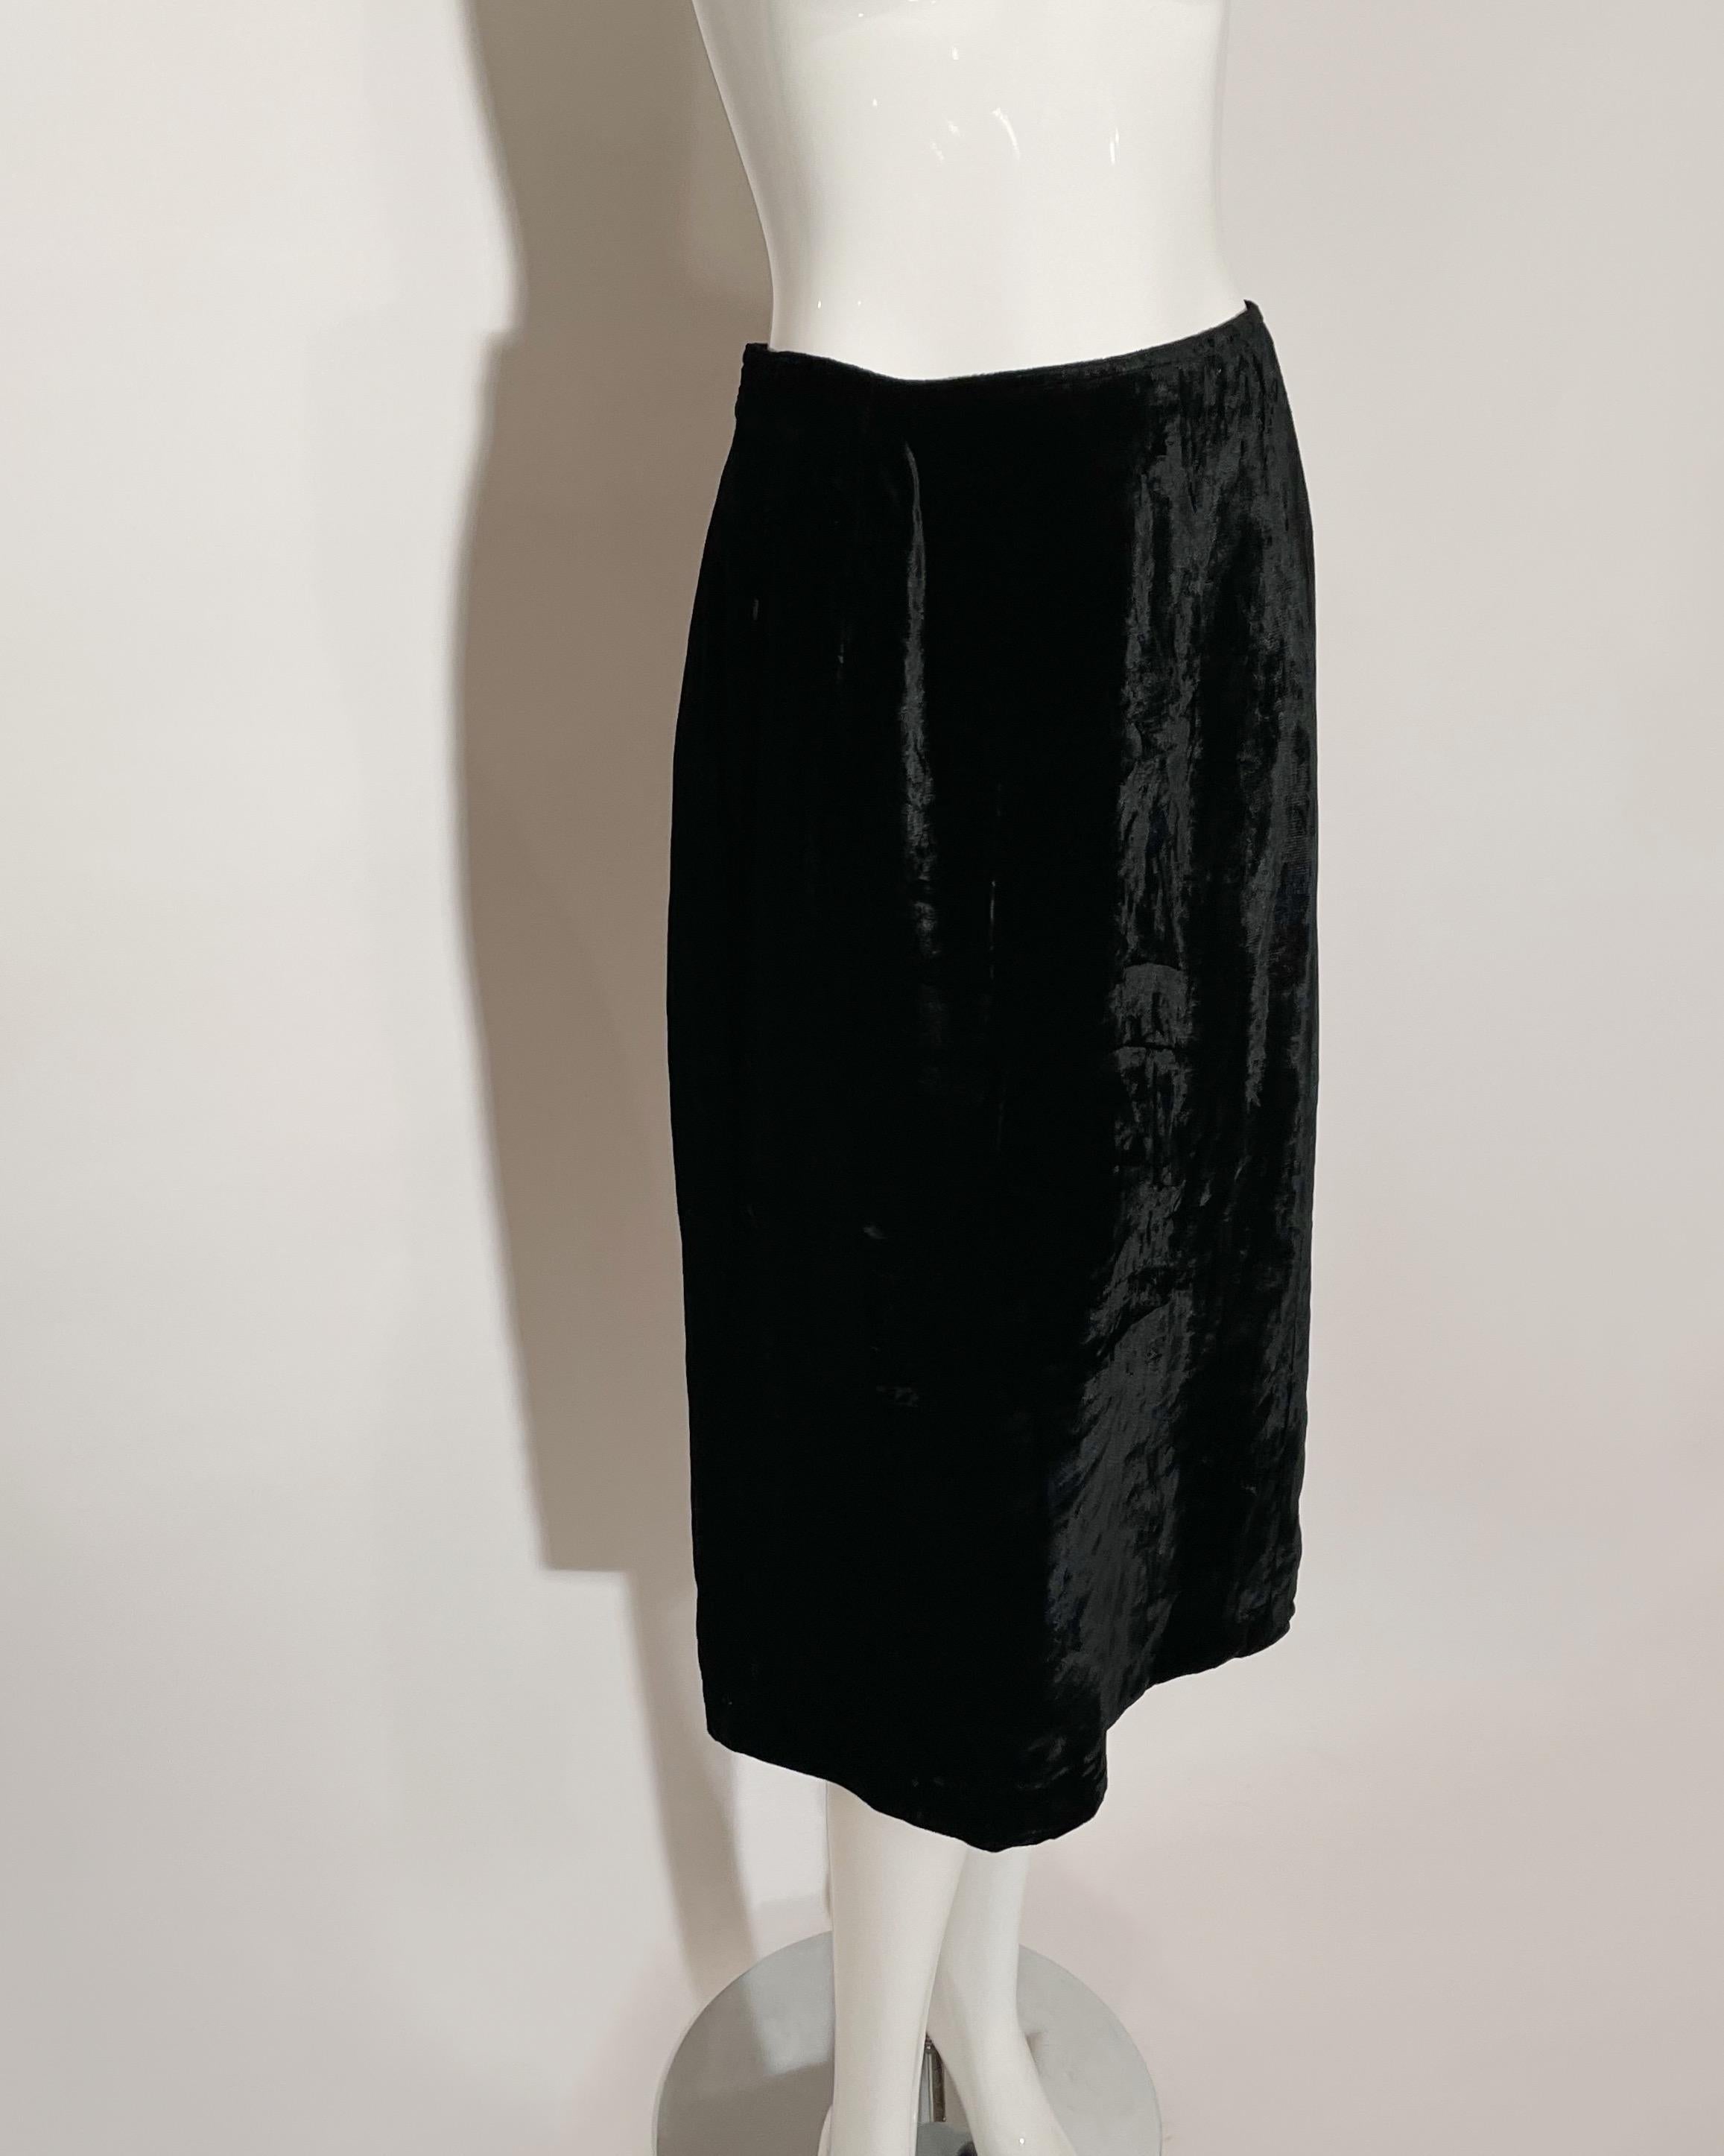 Black velvet skirt. Over the knee. Lined. Rear button and zipper closure. Lined. Made in Italy. 
*Condition: Excellent vintage condition. No visible flaws.

Measurements Taken Laying Flat (inches)—
Waist:  30 in.
Hip: 38 in.
Length: 29 in.
Marked